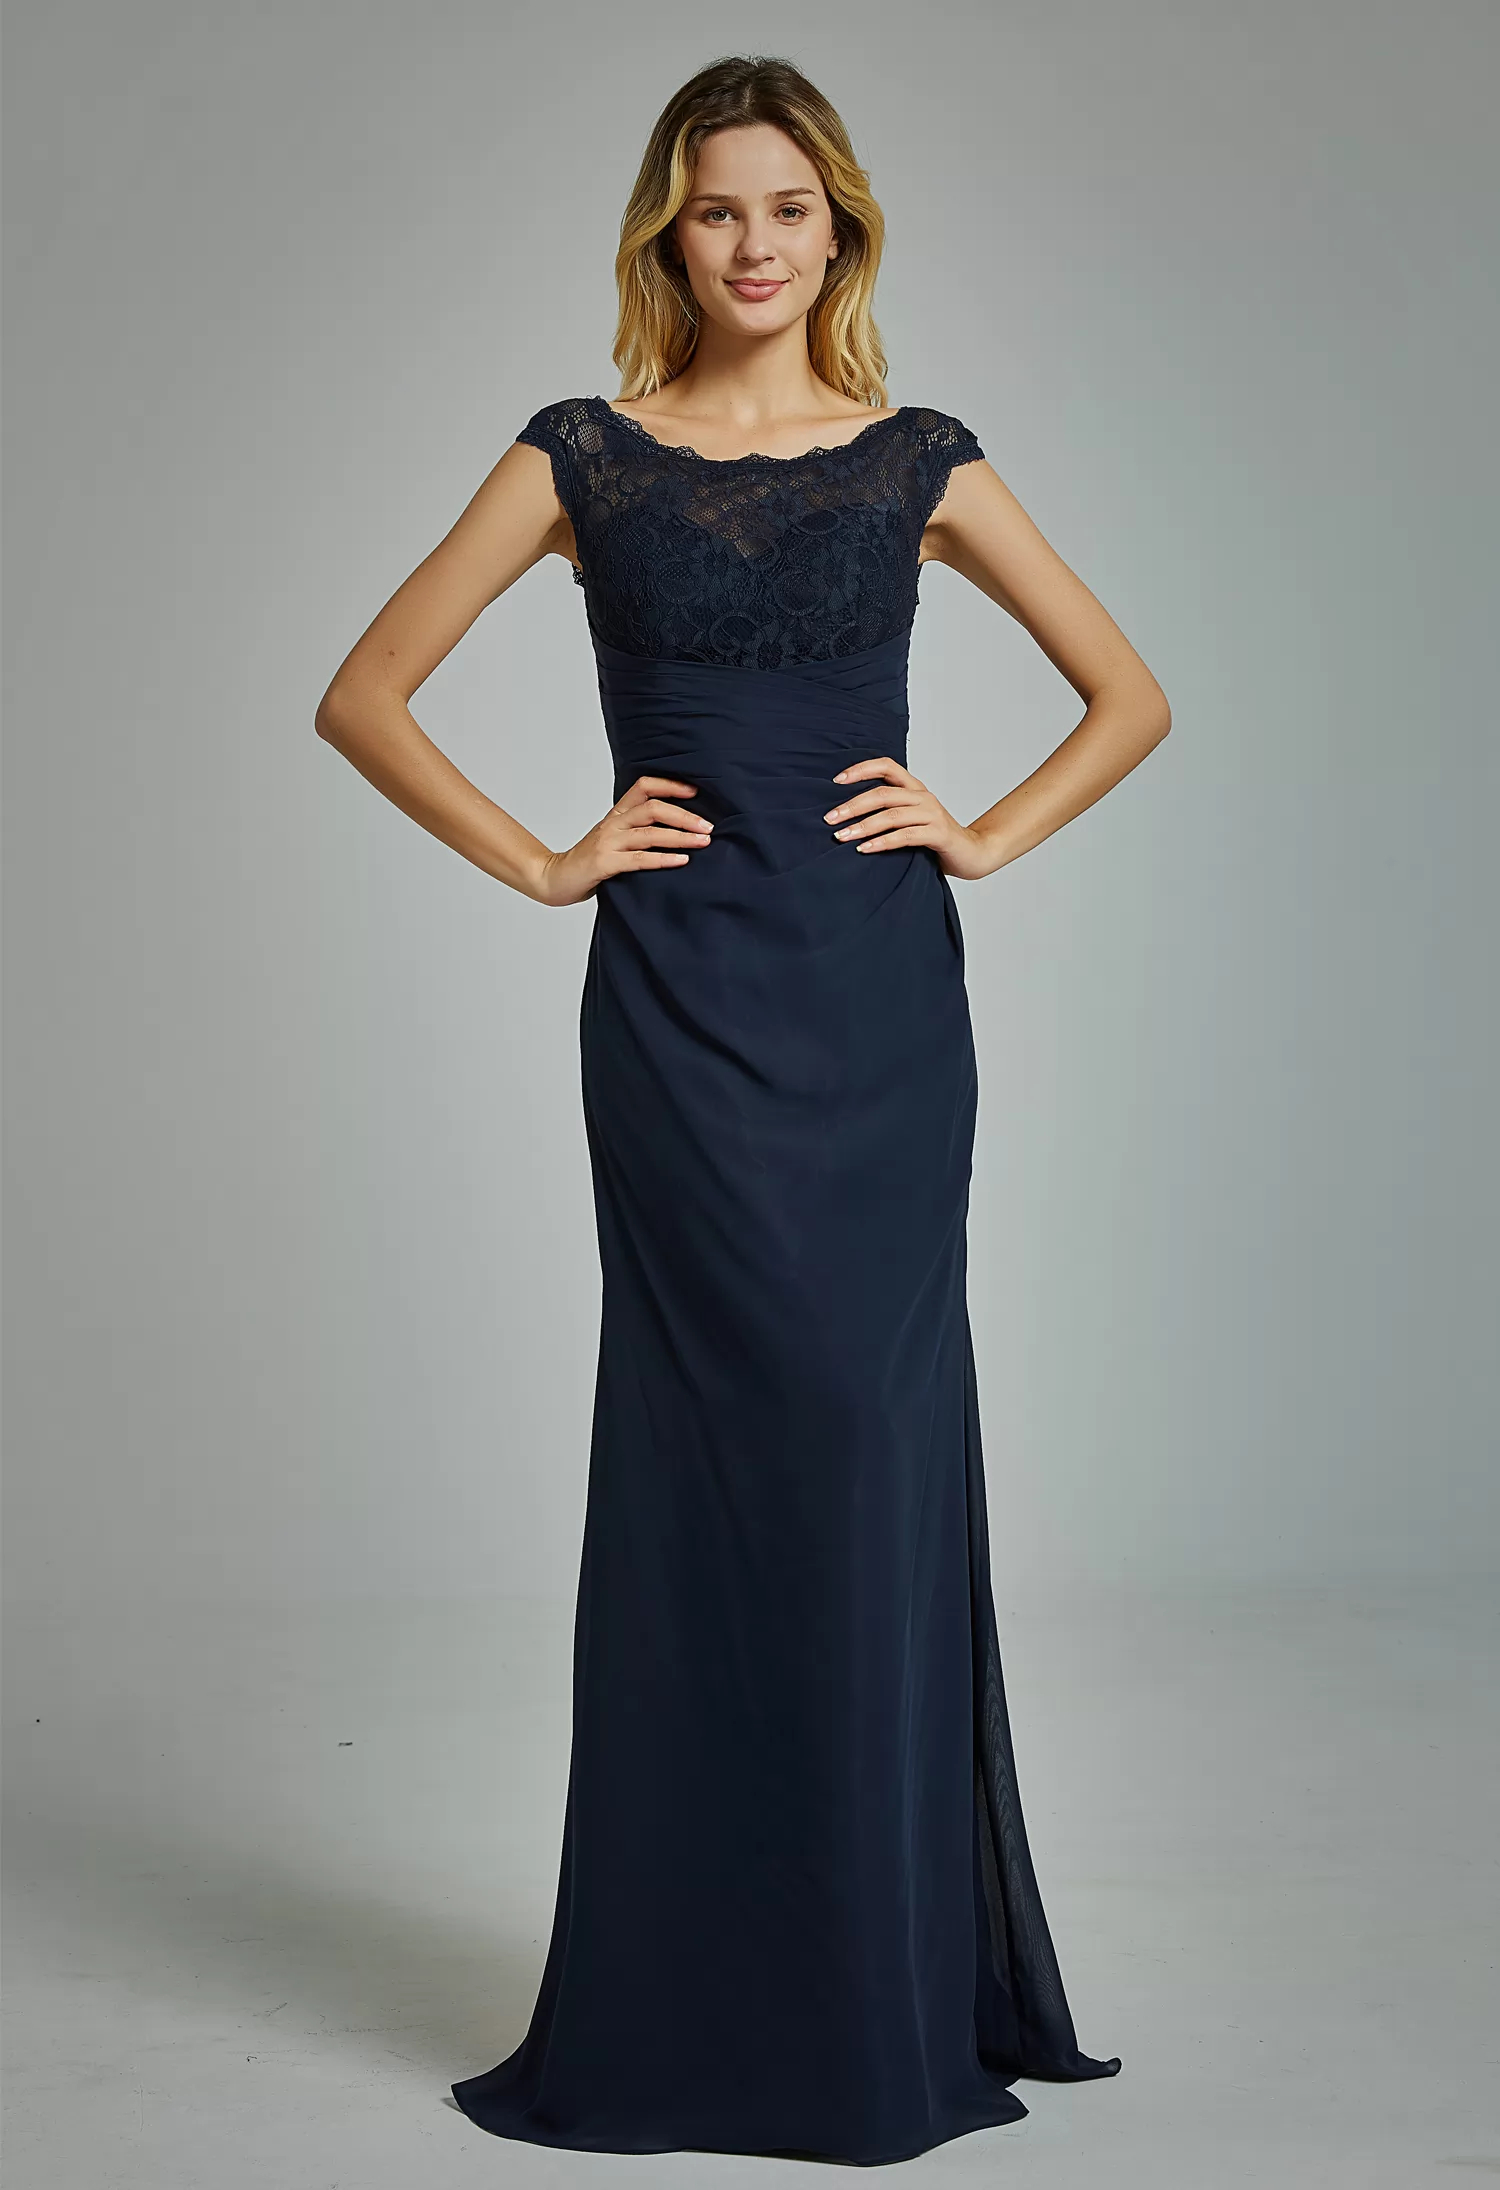 Chiffon Cap Sleeves Bridesmaid Dress with Ruched Bodice